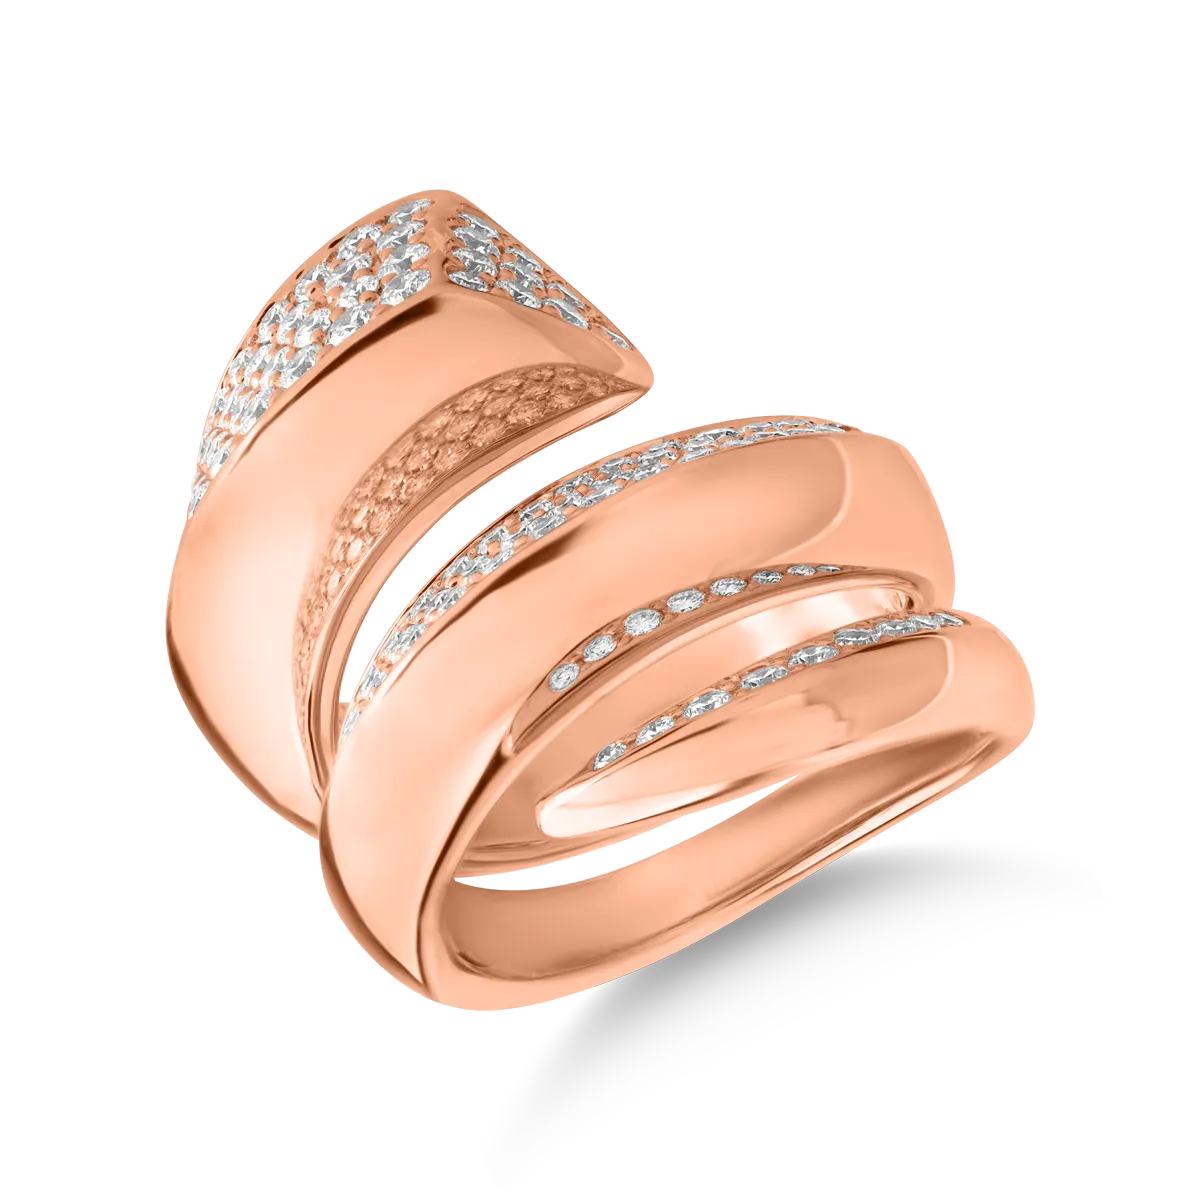 18k rose gold ring with 1.45ct diamonds